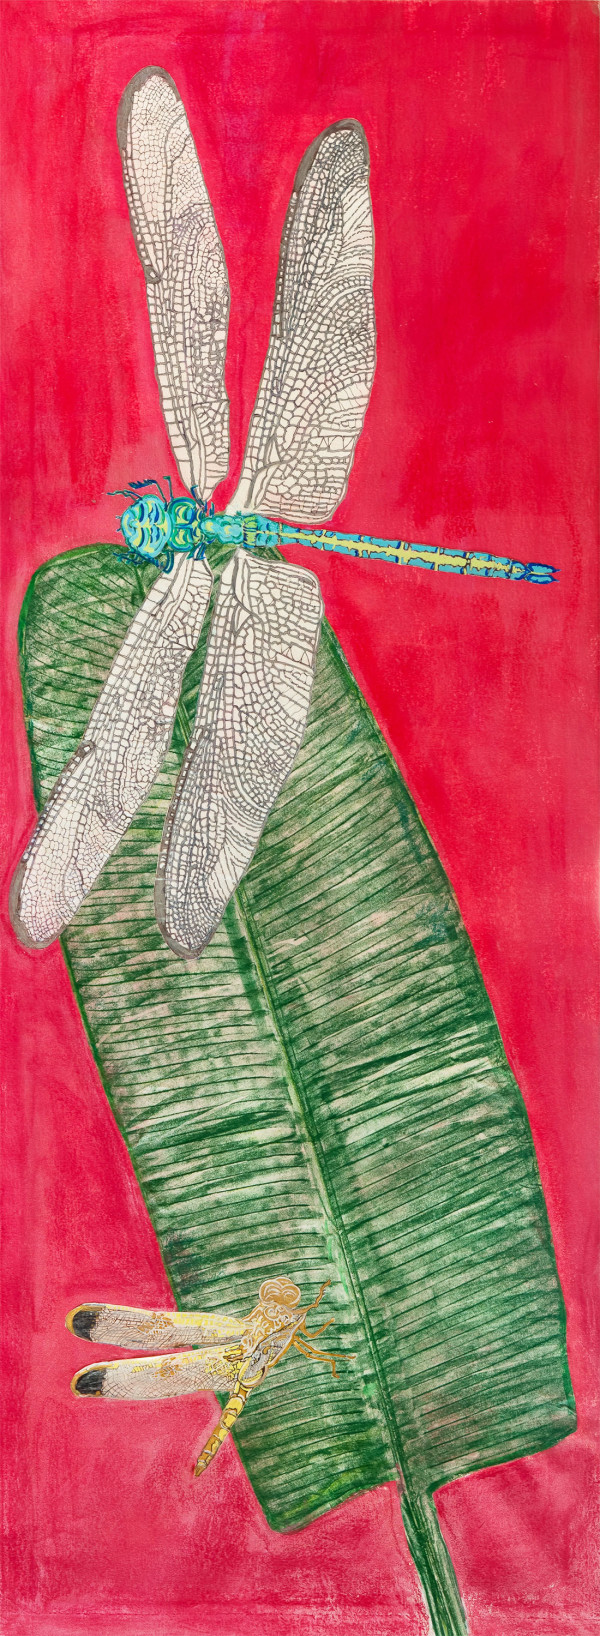 Dragonflies on Banana Leaf 1 by Alexandra Anderson Bower